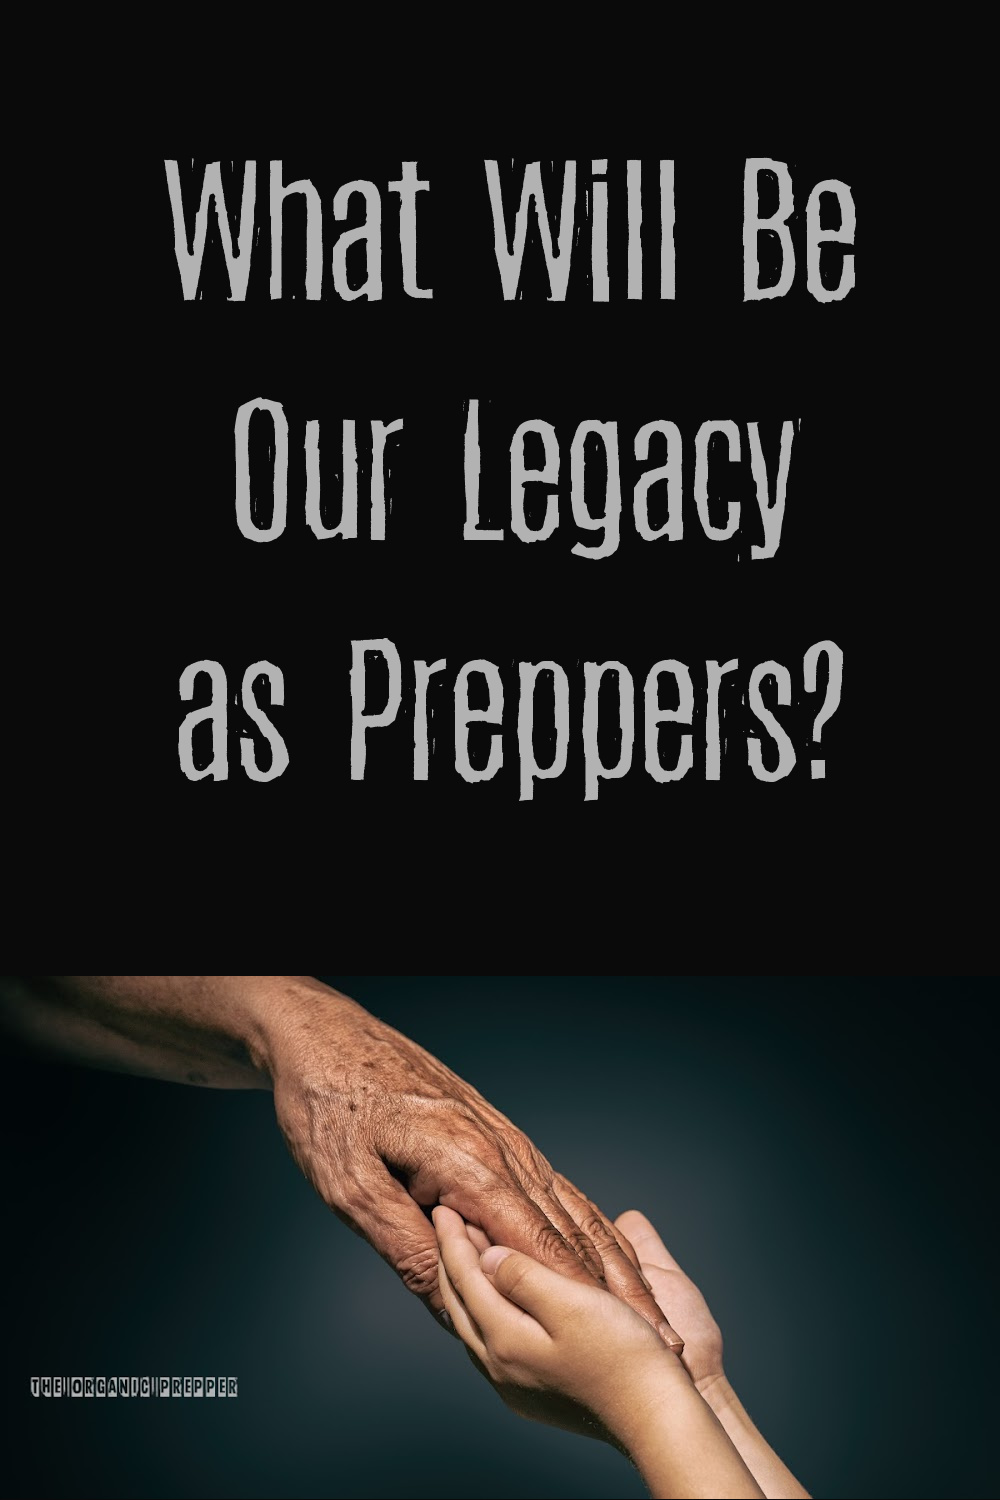 What Will Be Our Legacy as Preppers?